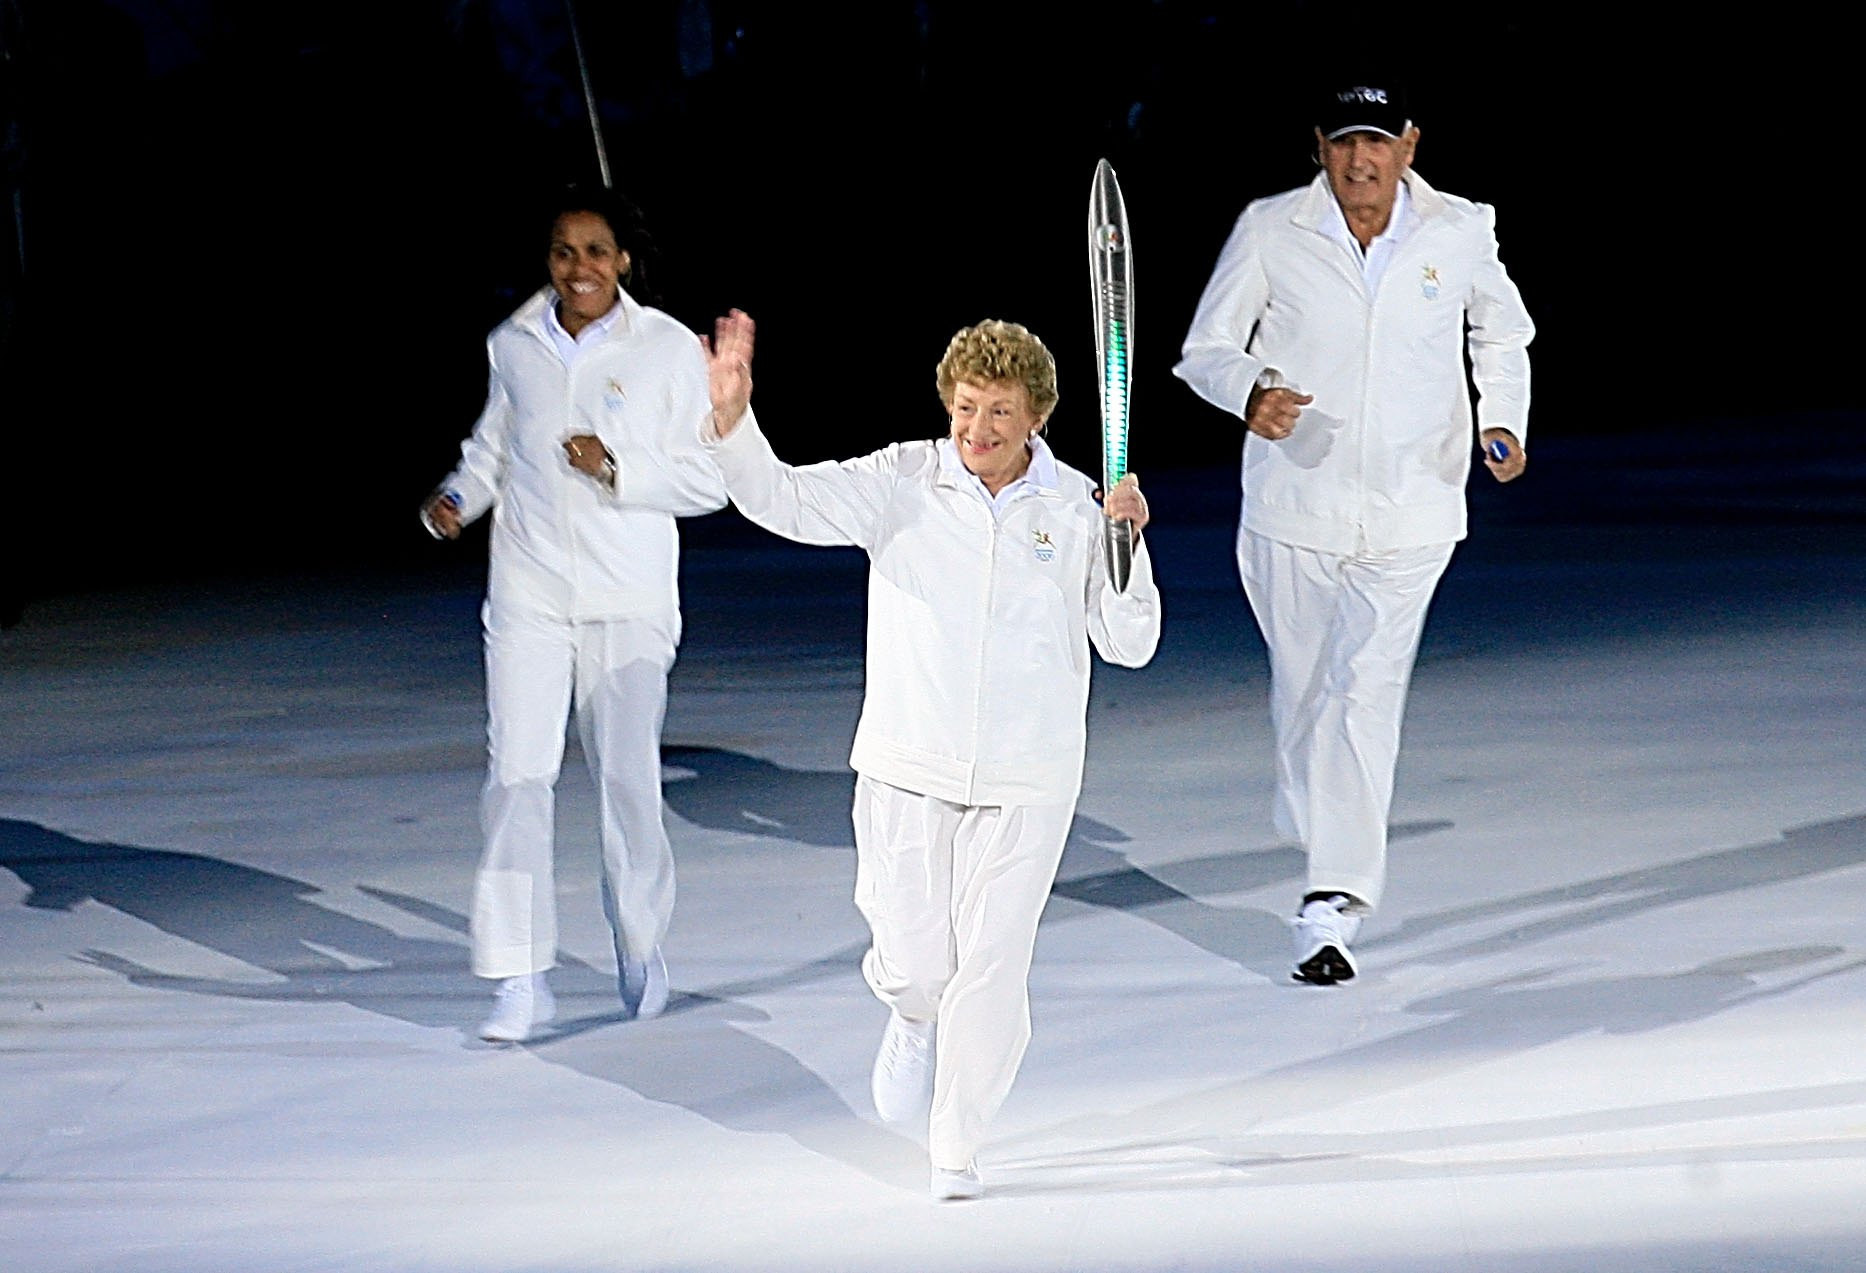 Marjorie Jackson-Nelson, holding the Queen's Baton at Melbourne 2006, has received life membership from Commonwealth Games Australia ©Getty Images